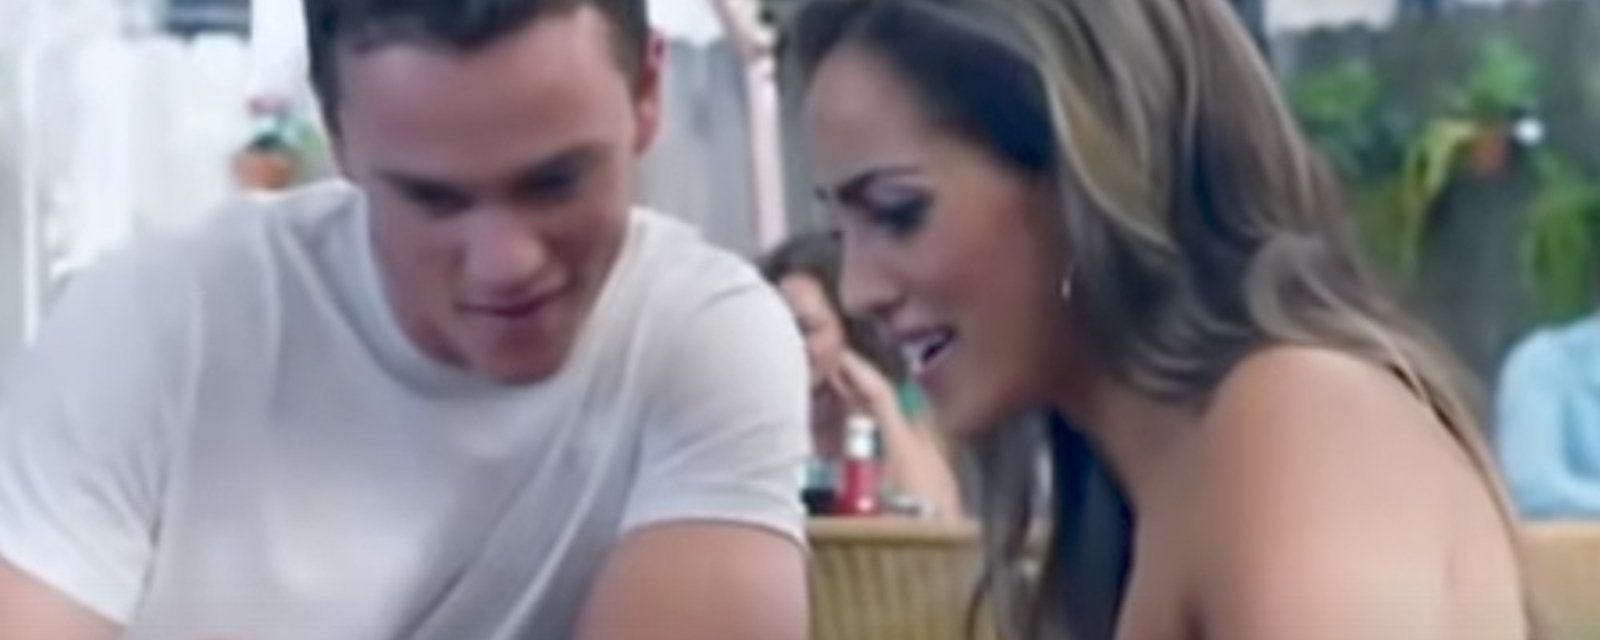 Flashback: Jonathan Toews and Patrick Kane star in world's most awkward commercial 